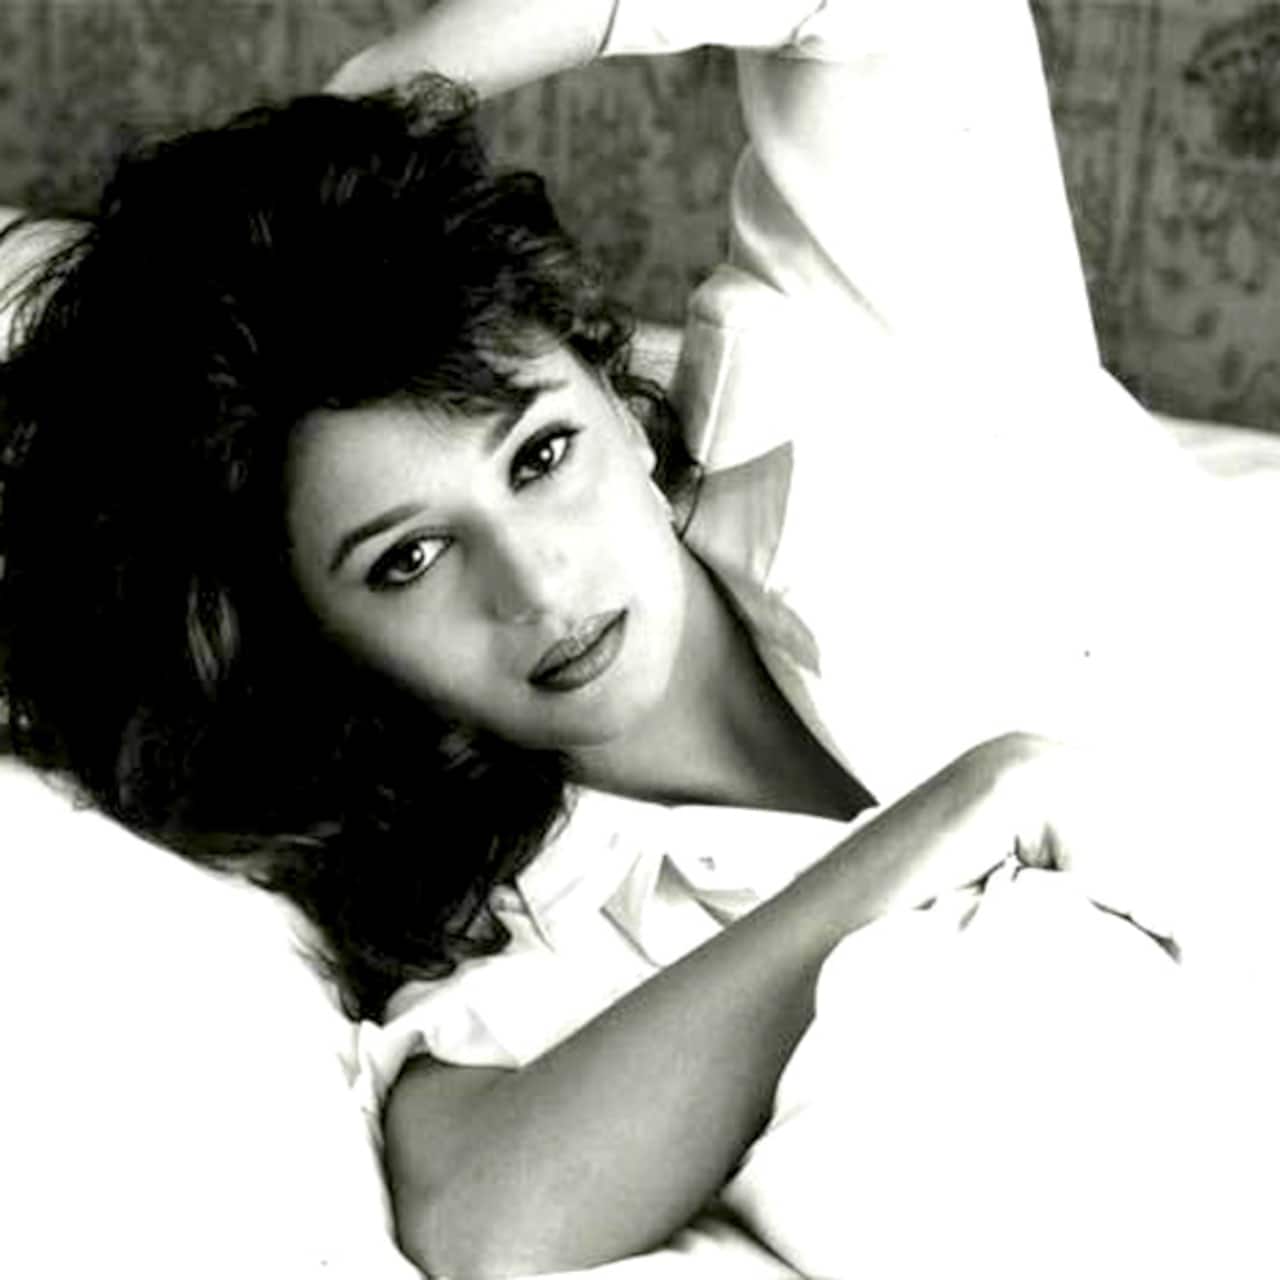 Madhuri Dixit clicked in this sensuous pose for a photoshoot